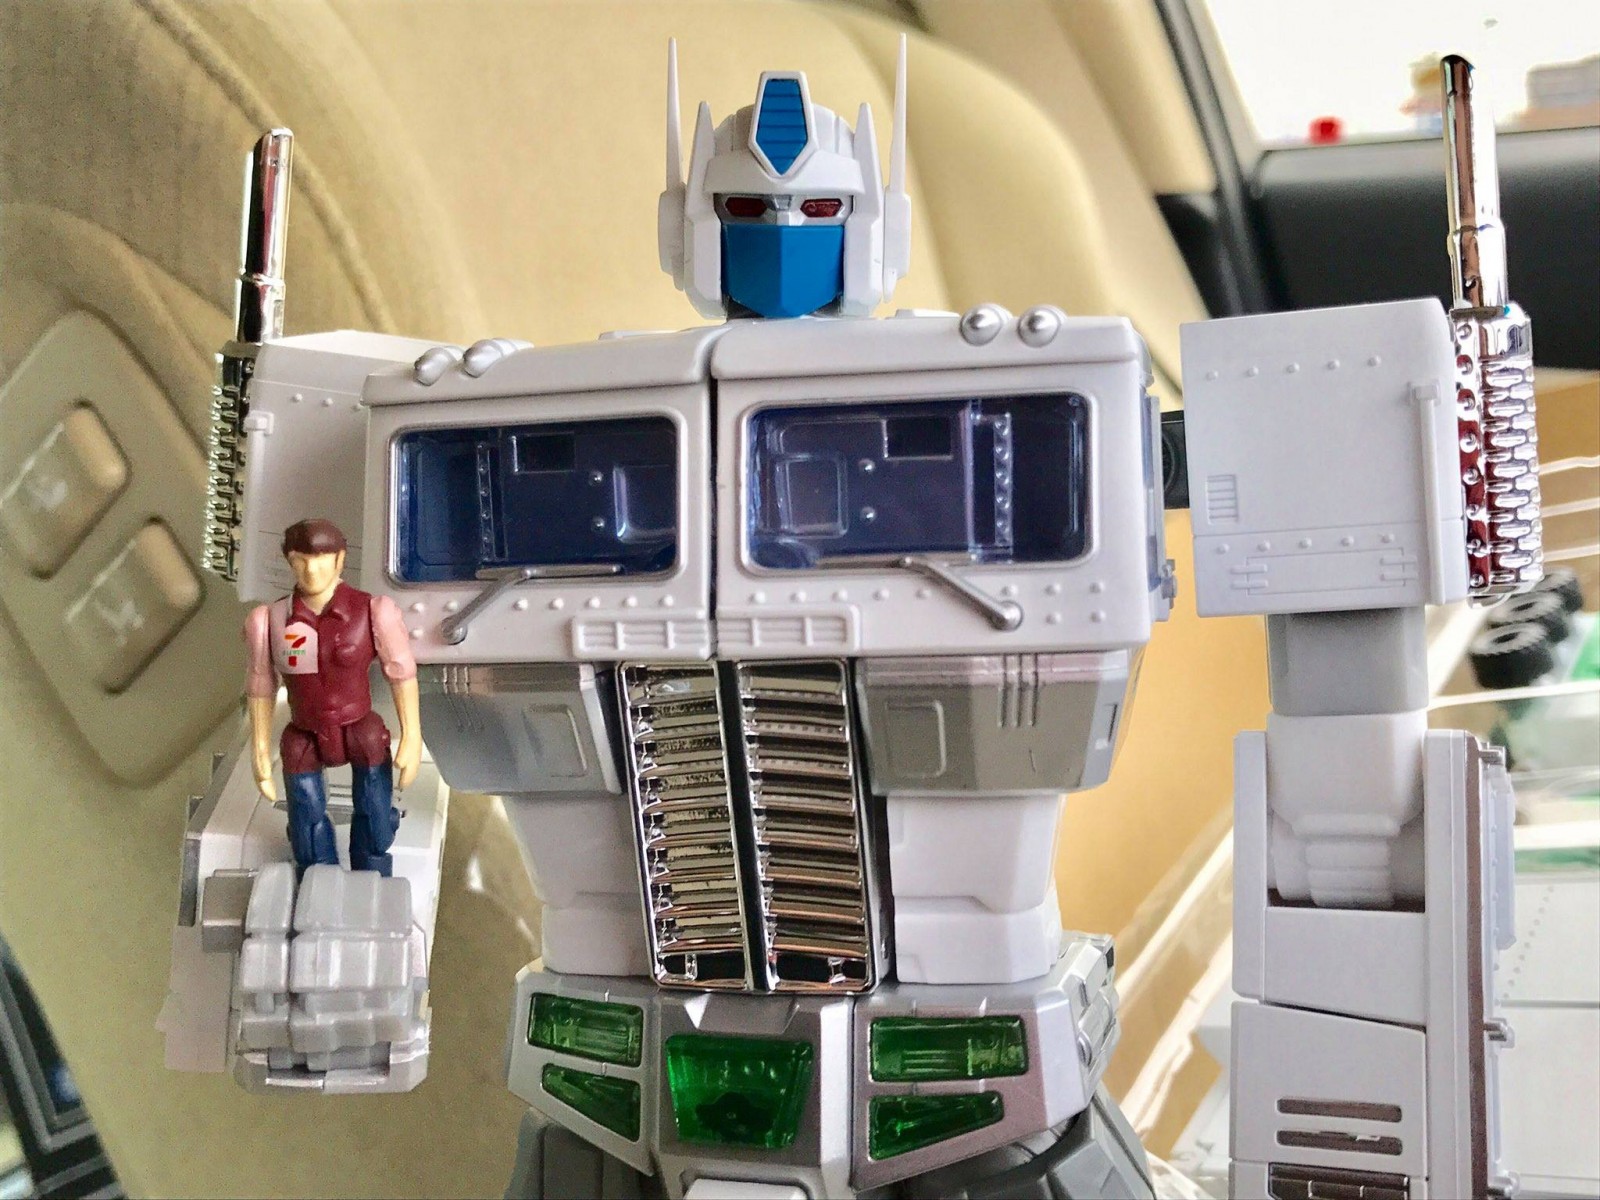 Transformers News: In-Hand Images of Takara Tomy Transformers Masterpiece MP-10 Convoy 7-11 Edition